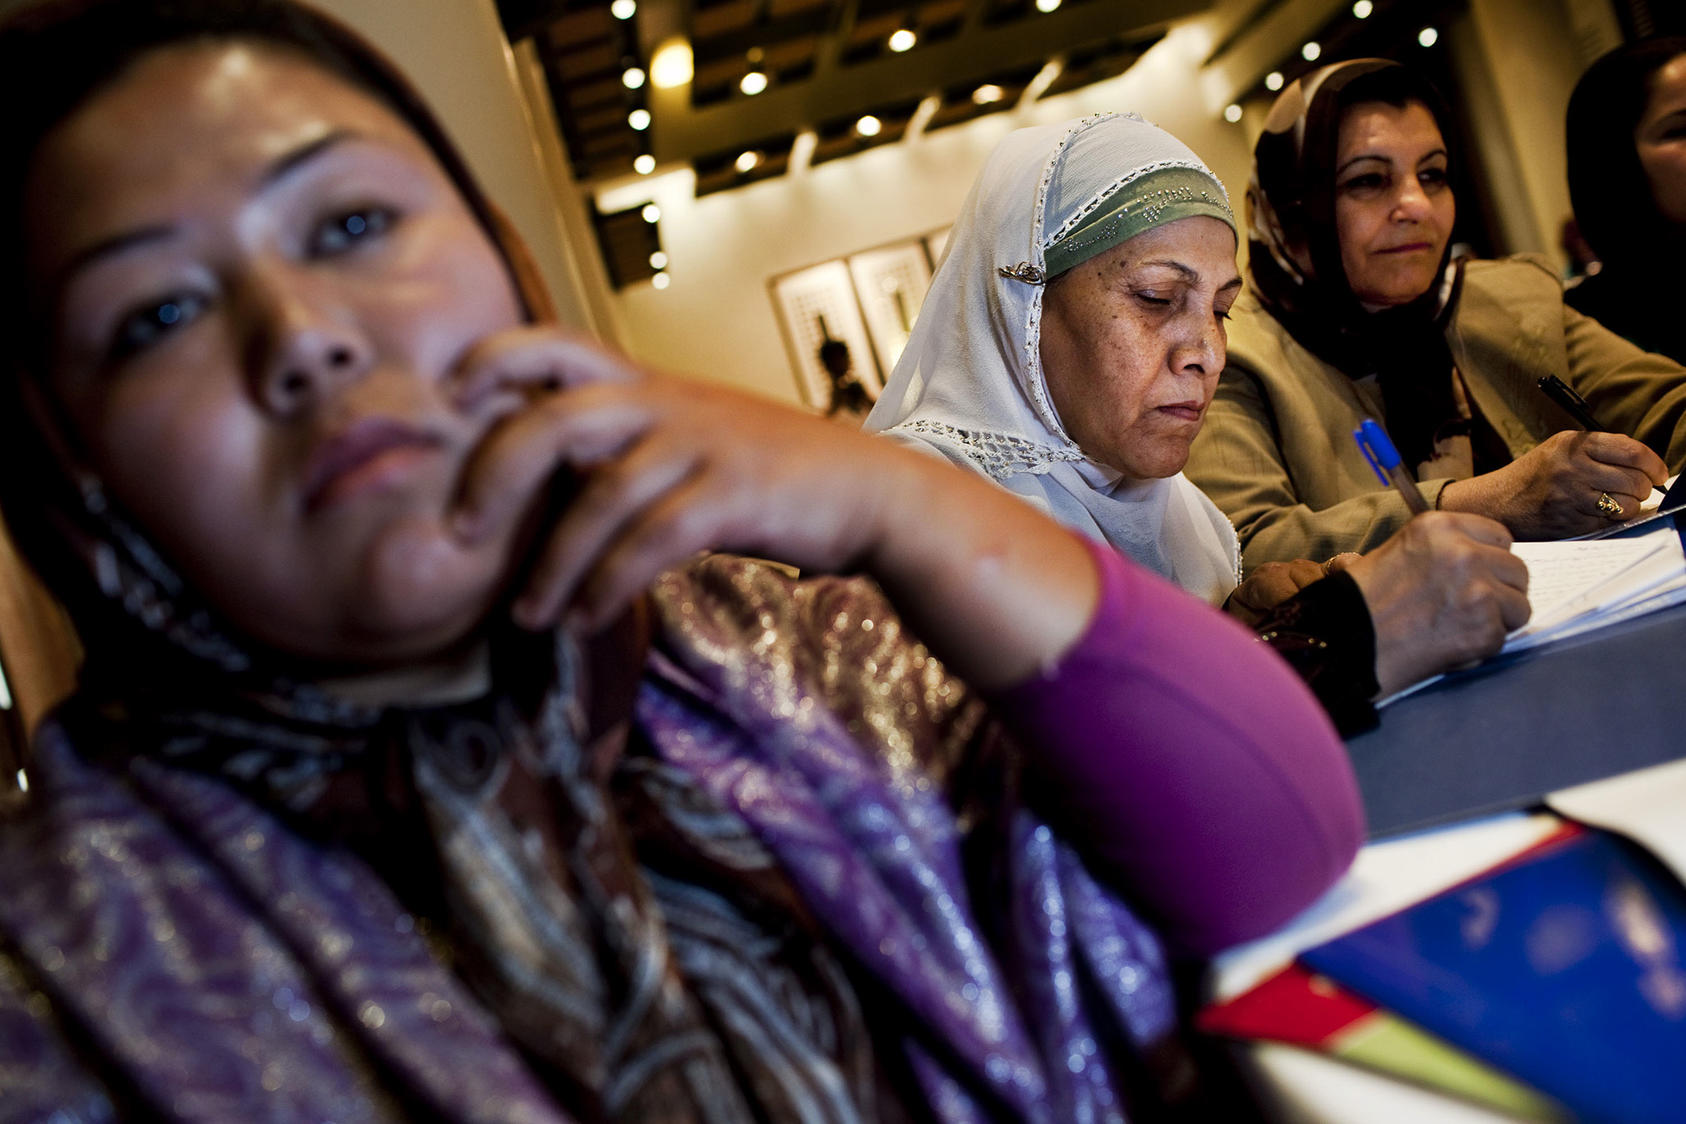 Afghan women at a conference in Kabul. The rise of a generation of educated, professional Afghan women is an undeniable sign of change, but amid peace talks, many are worried that the strides they have made are at risk. (Eros Hoagland/The New York Times)